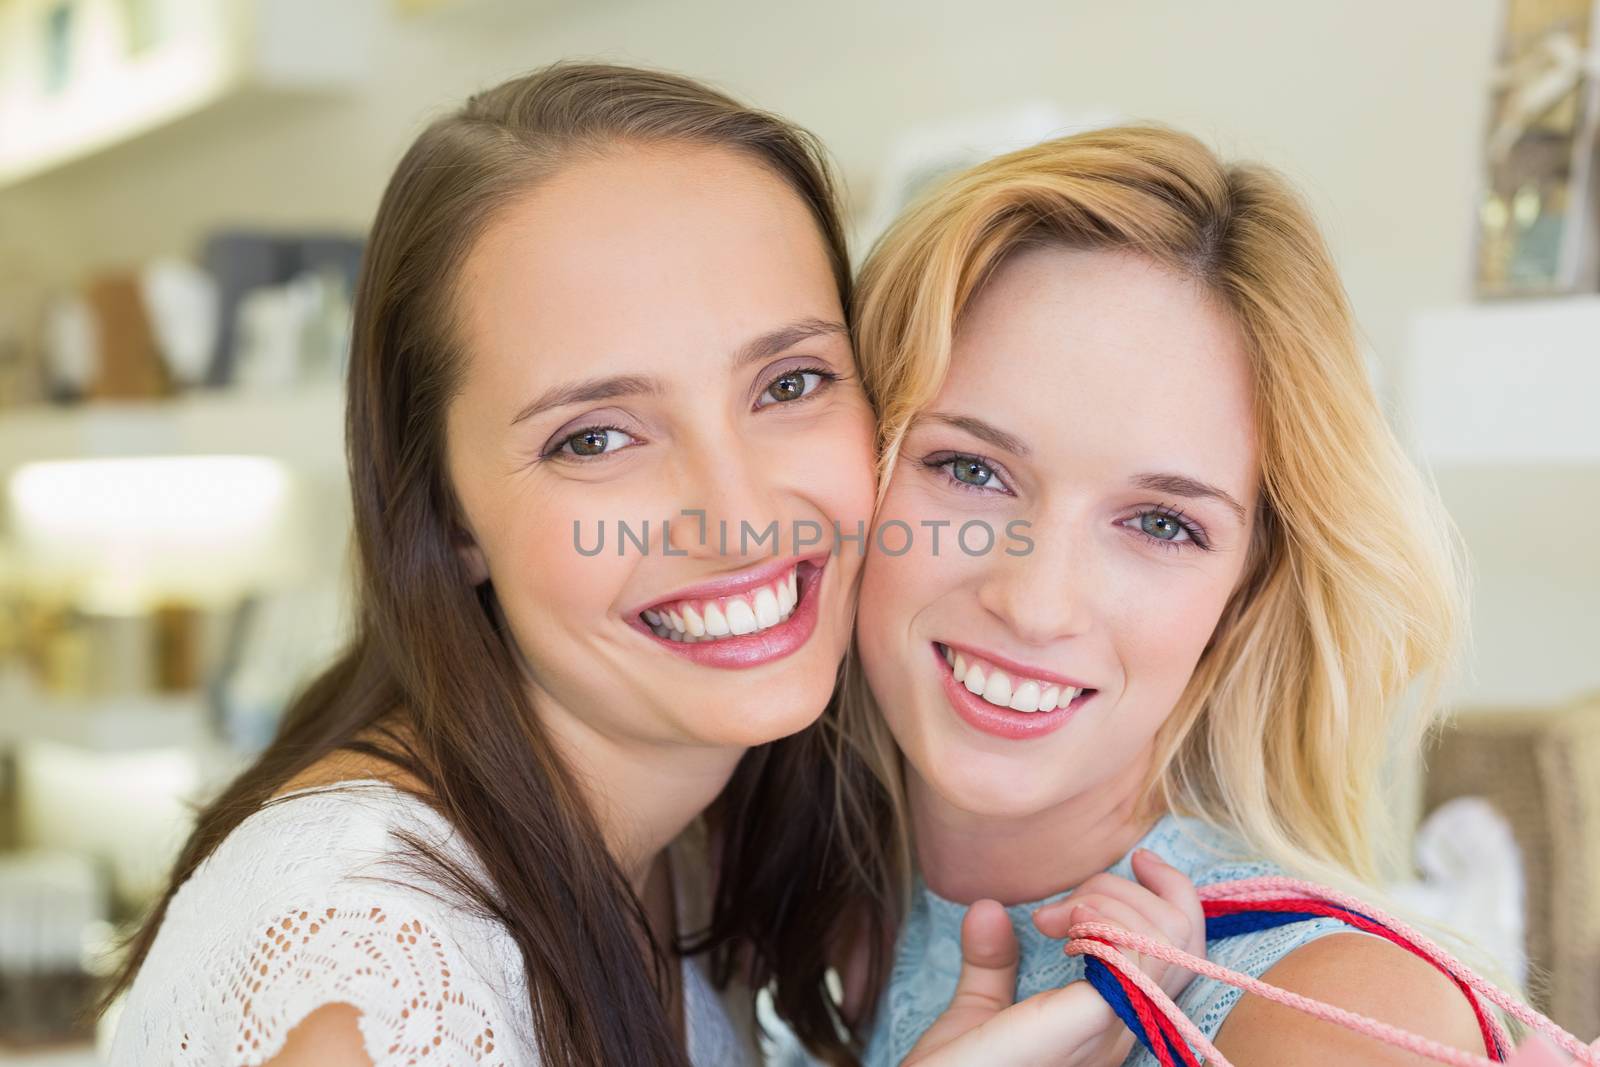 Portrait of happy women smiling at camera in a beauty salon